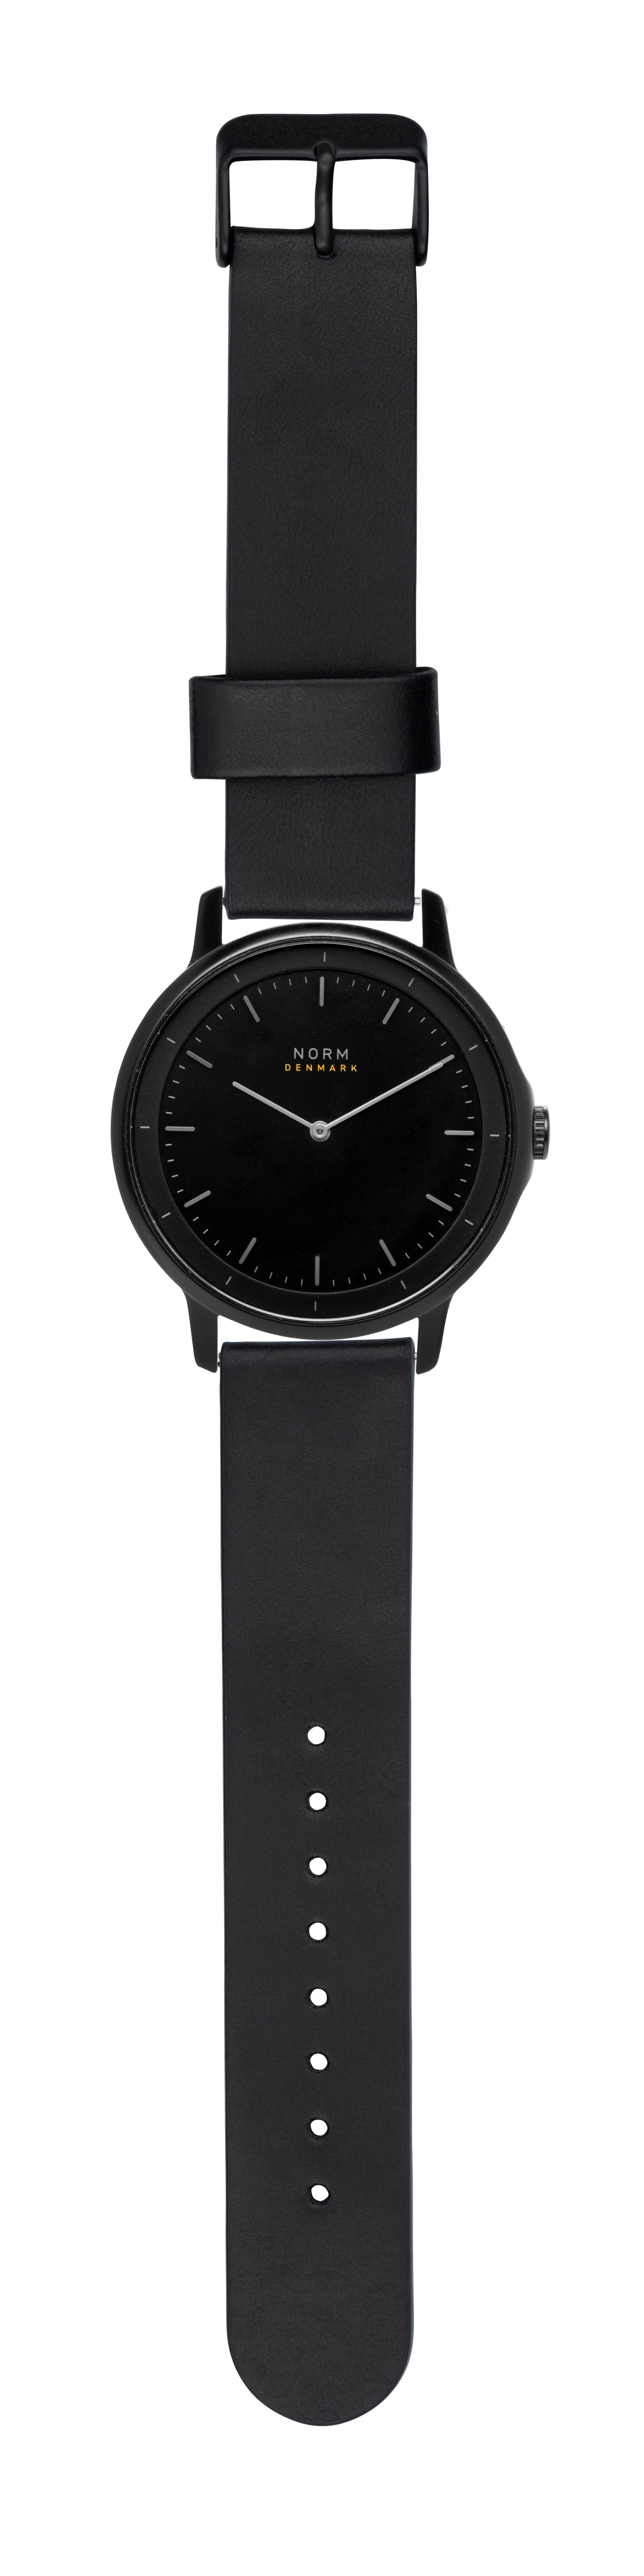 Rubber Watch Straps | Black Rubber Watch Bands | NORM Denmark